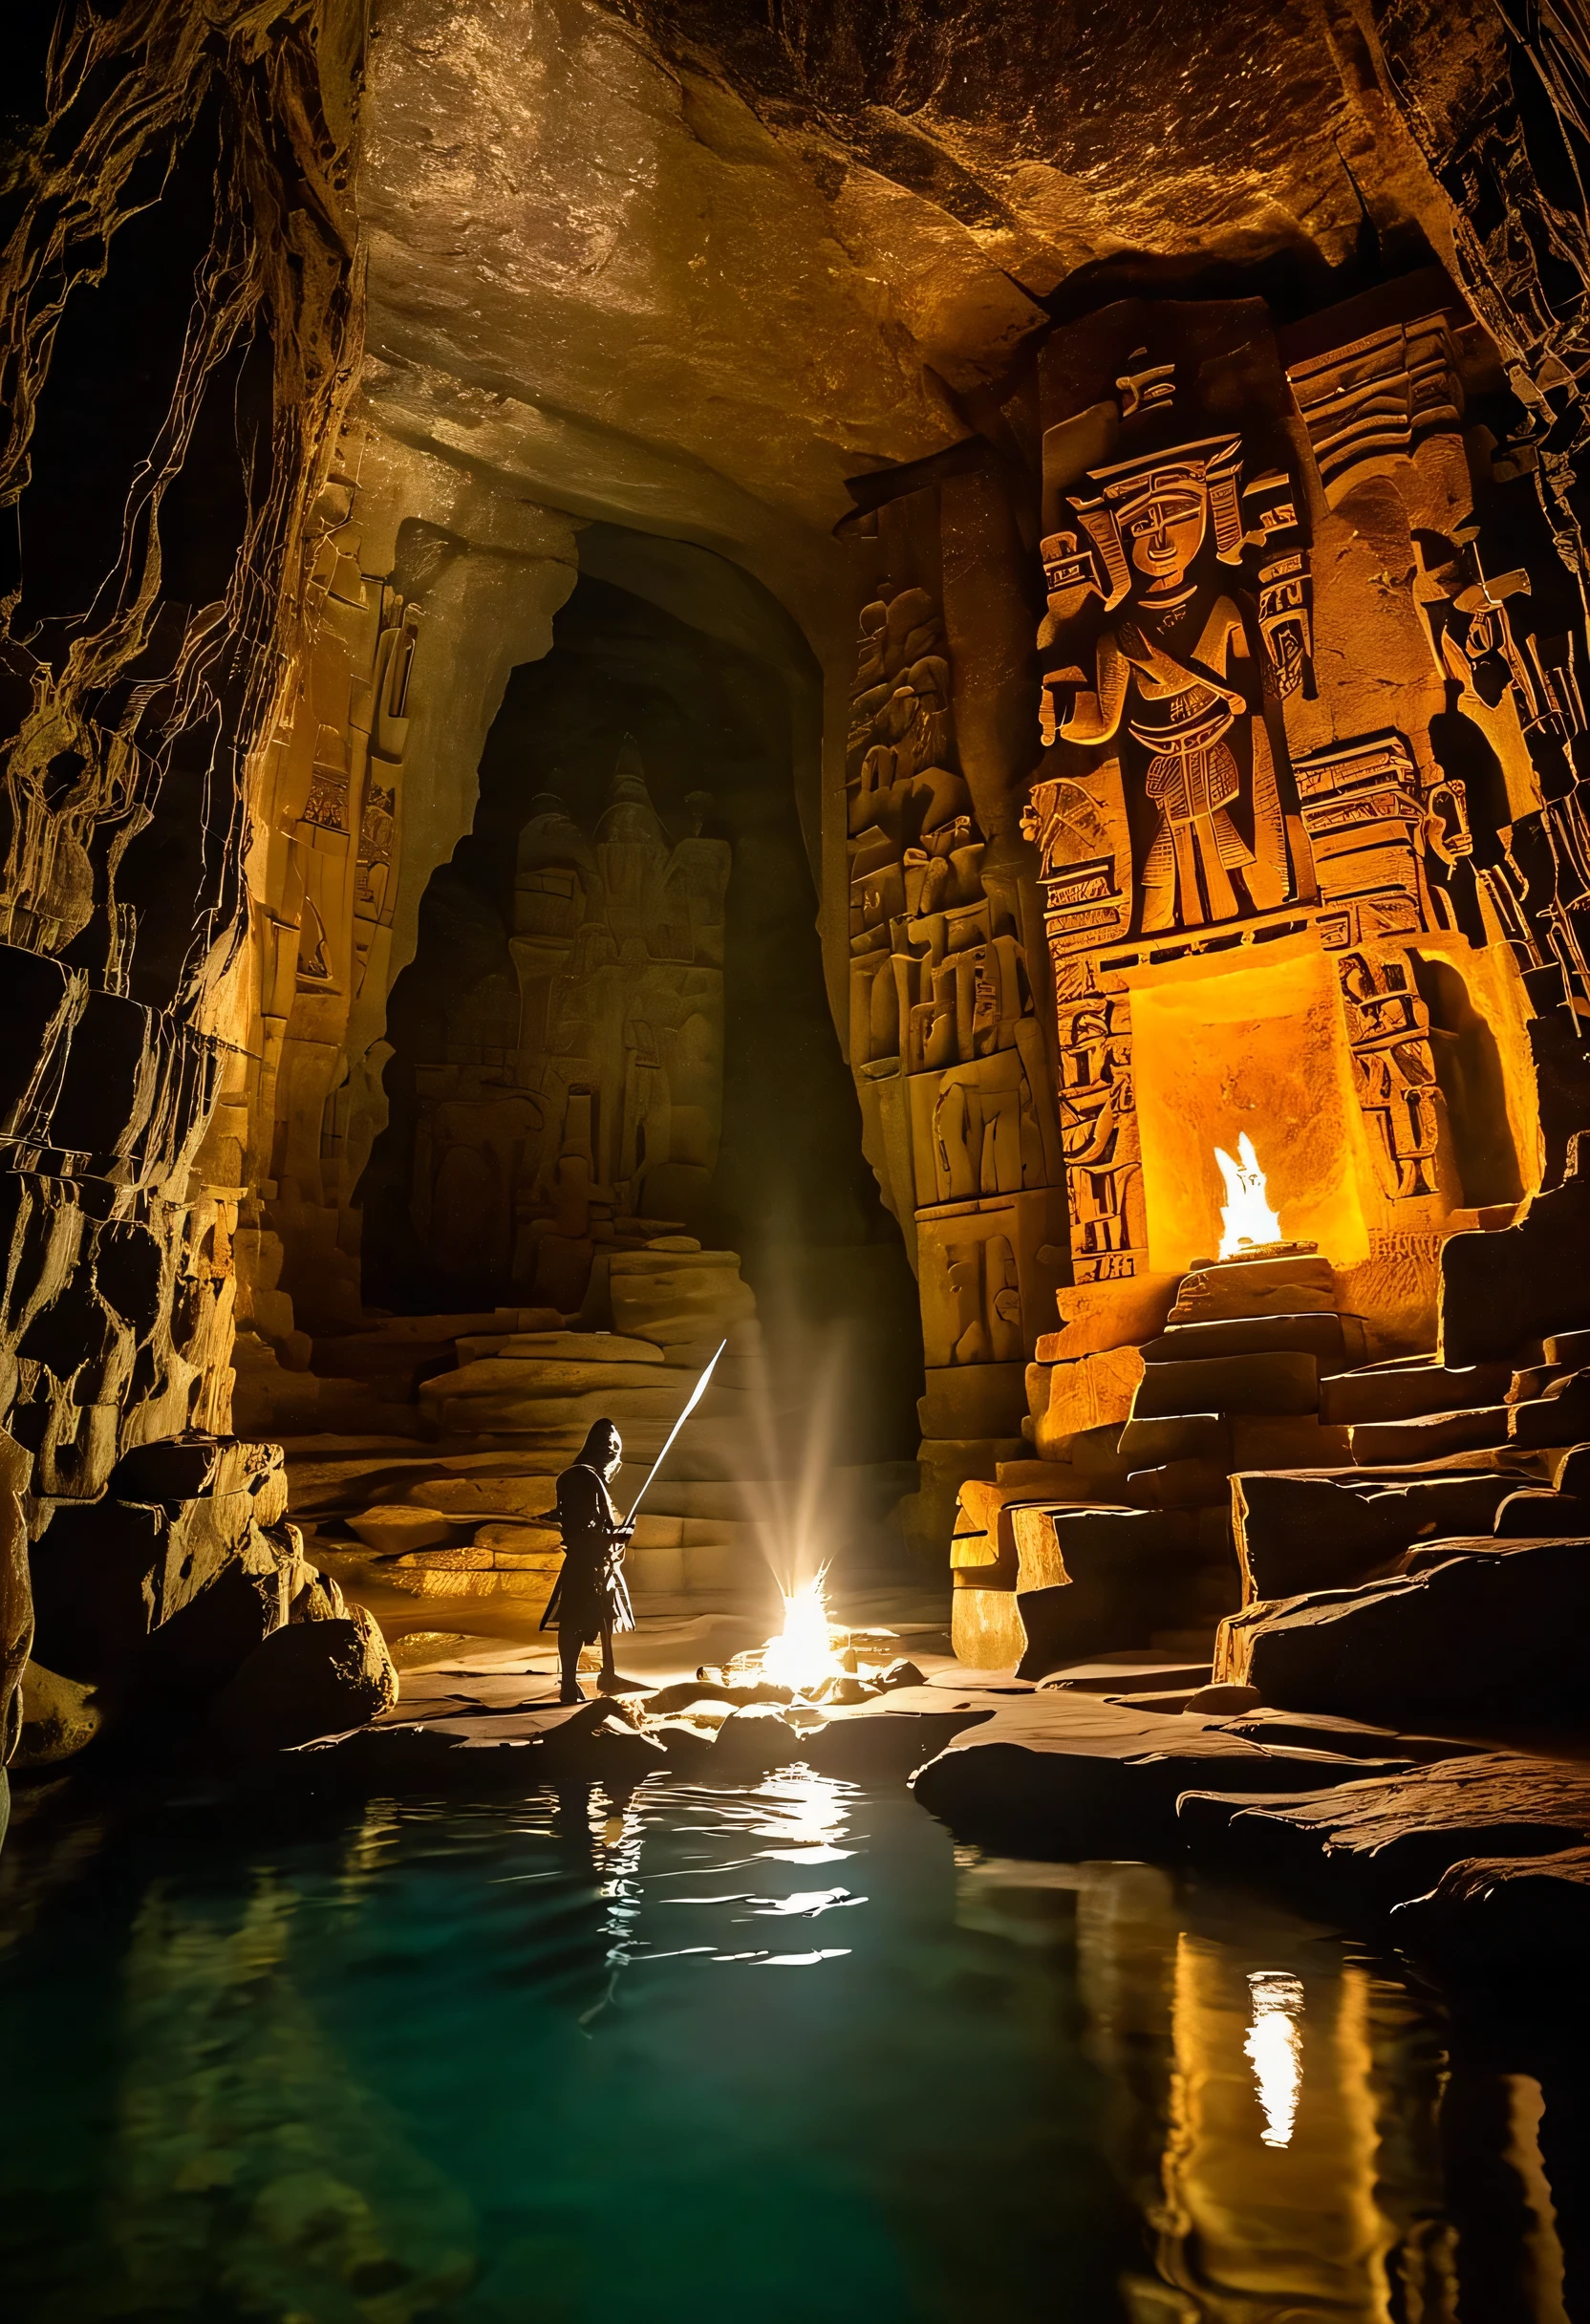 show me an image of a knight in a cave filled with shallows pools. The only light in the image comes from a torch the knight is holding. In front of the knight is an ancient and weathering stone carving depicting two Incan goddesses locked in battle. Epic fantasy.